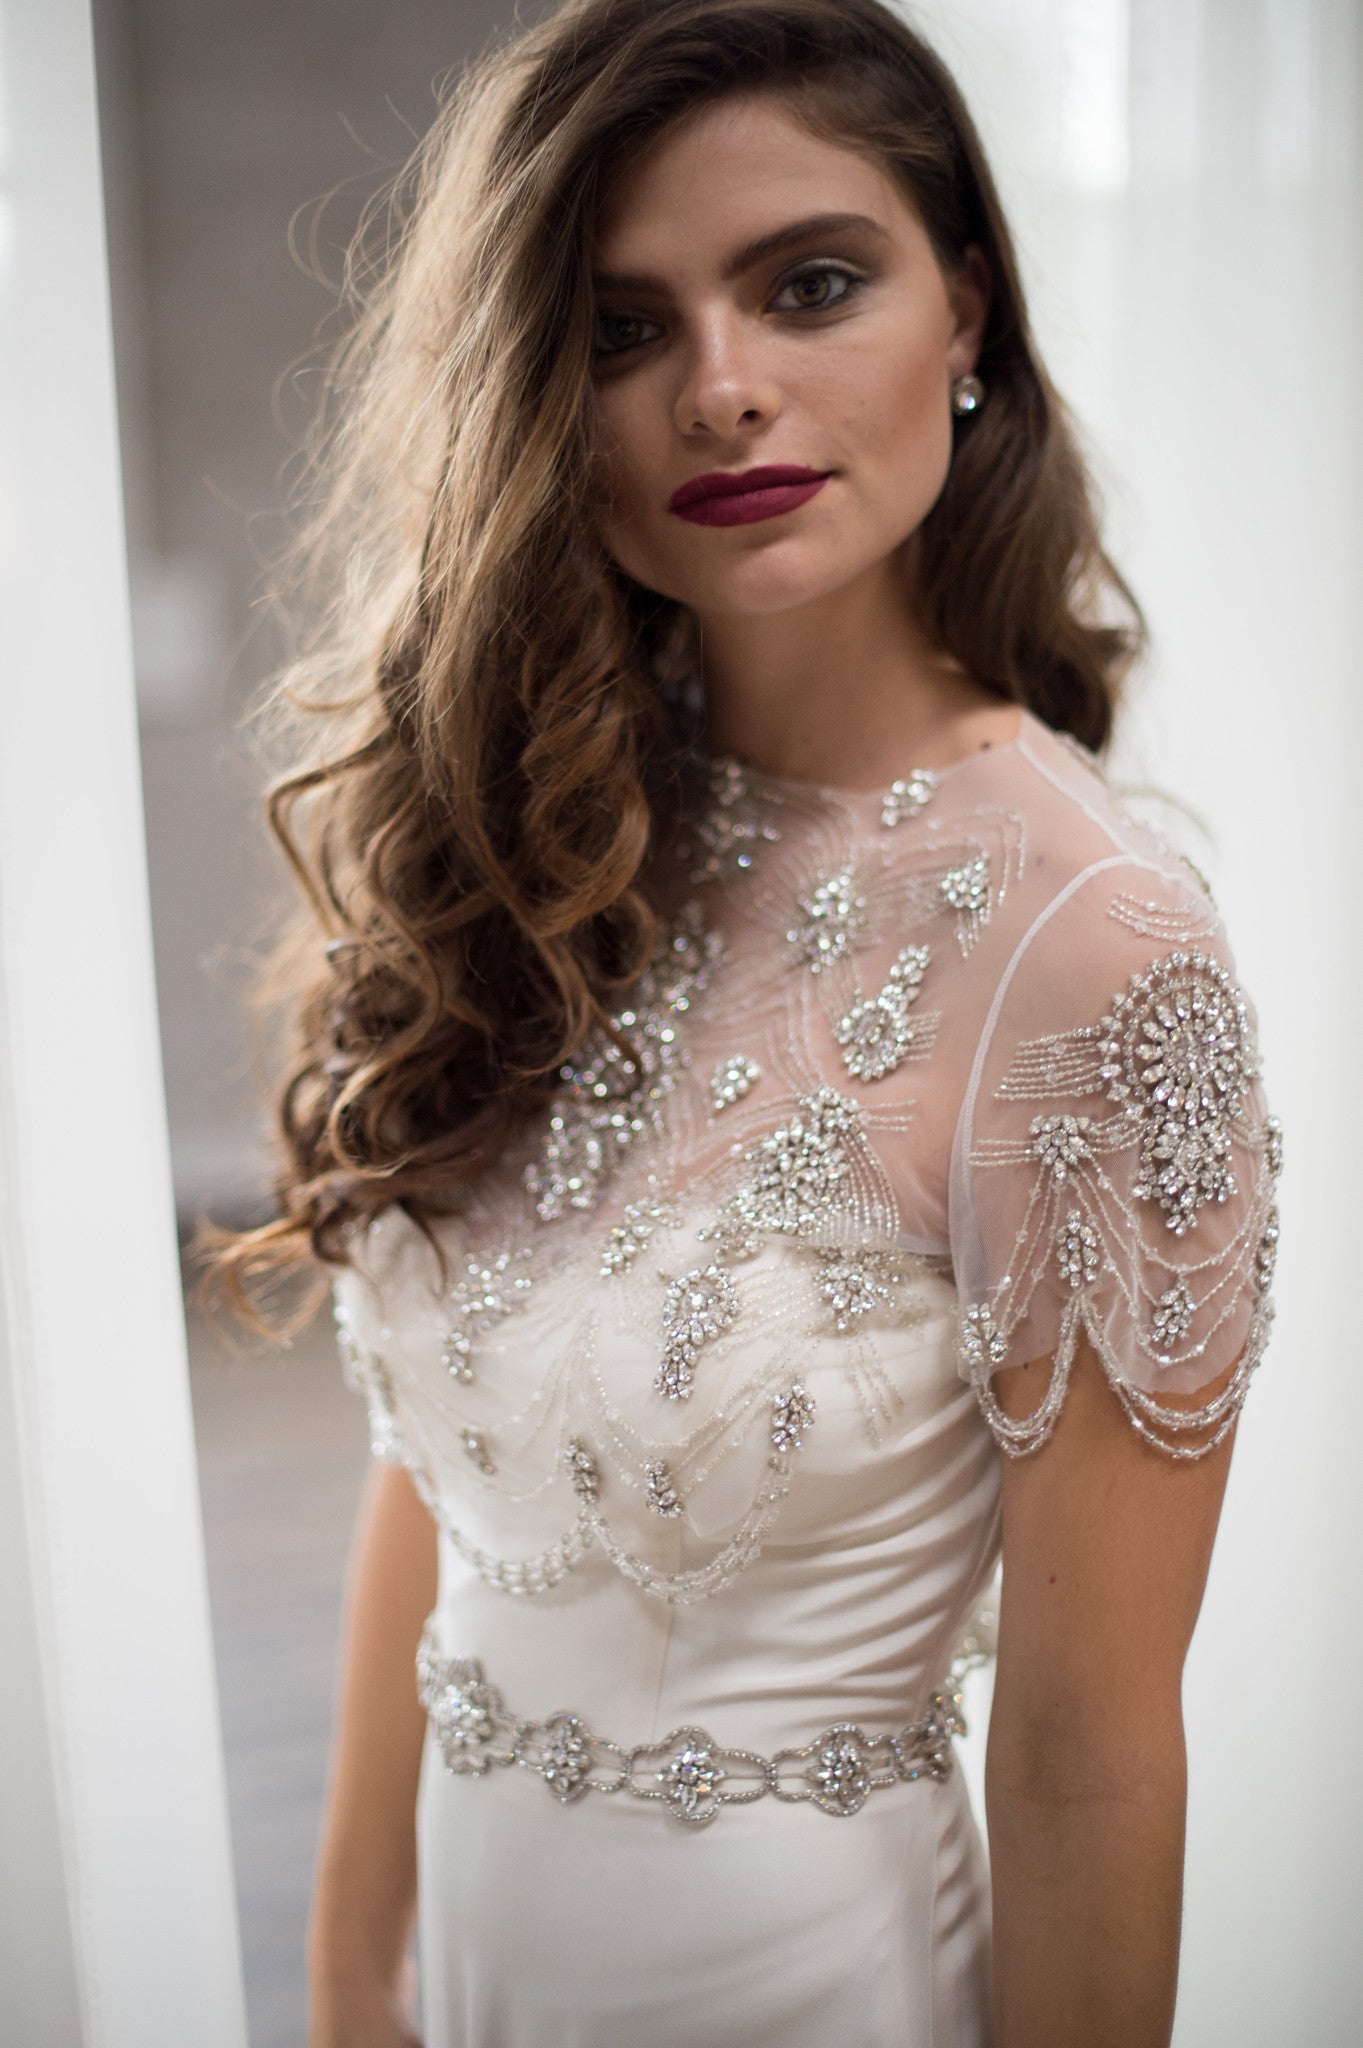 Wedding Dress Topper Beaded Bridal Top Separate Embellished Rhinestone Bolero Art Deco Jacket for Bride Crop Top Short Sleeve Cover Up DAISY by Camilla Christine Bridal Accessories and Wedding Jewelry, Wedding Inspiration Bridal Style